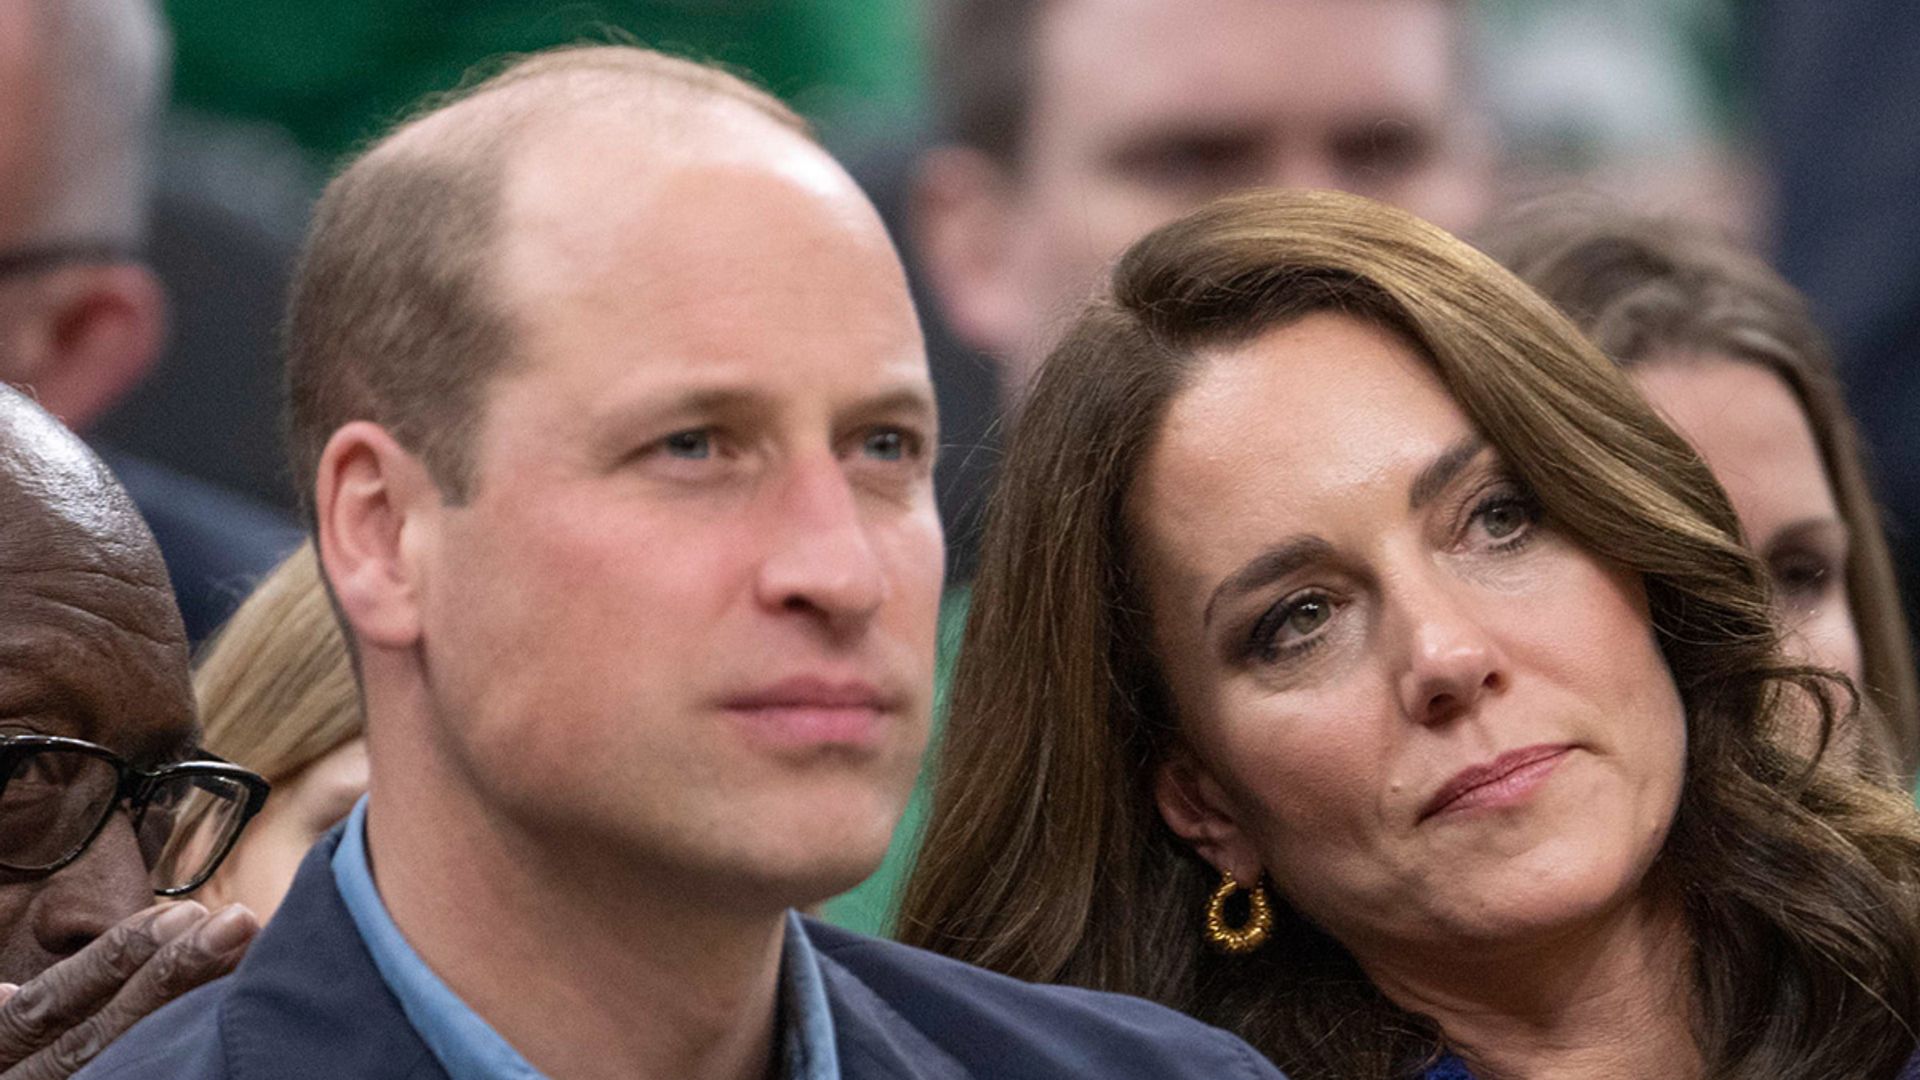 Prince William and Princess Kate's reaction to Prince Harry and Meghan's new docu-series revealed